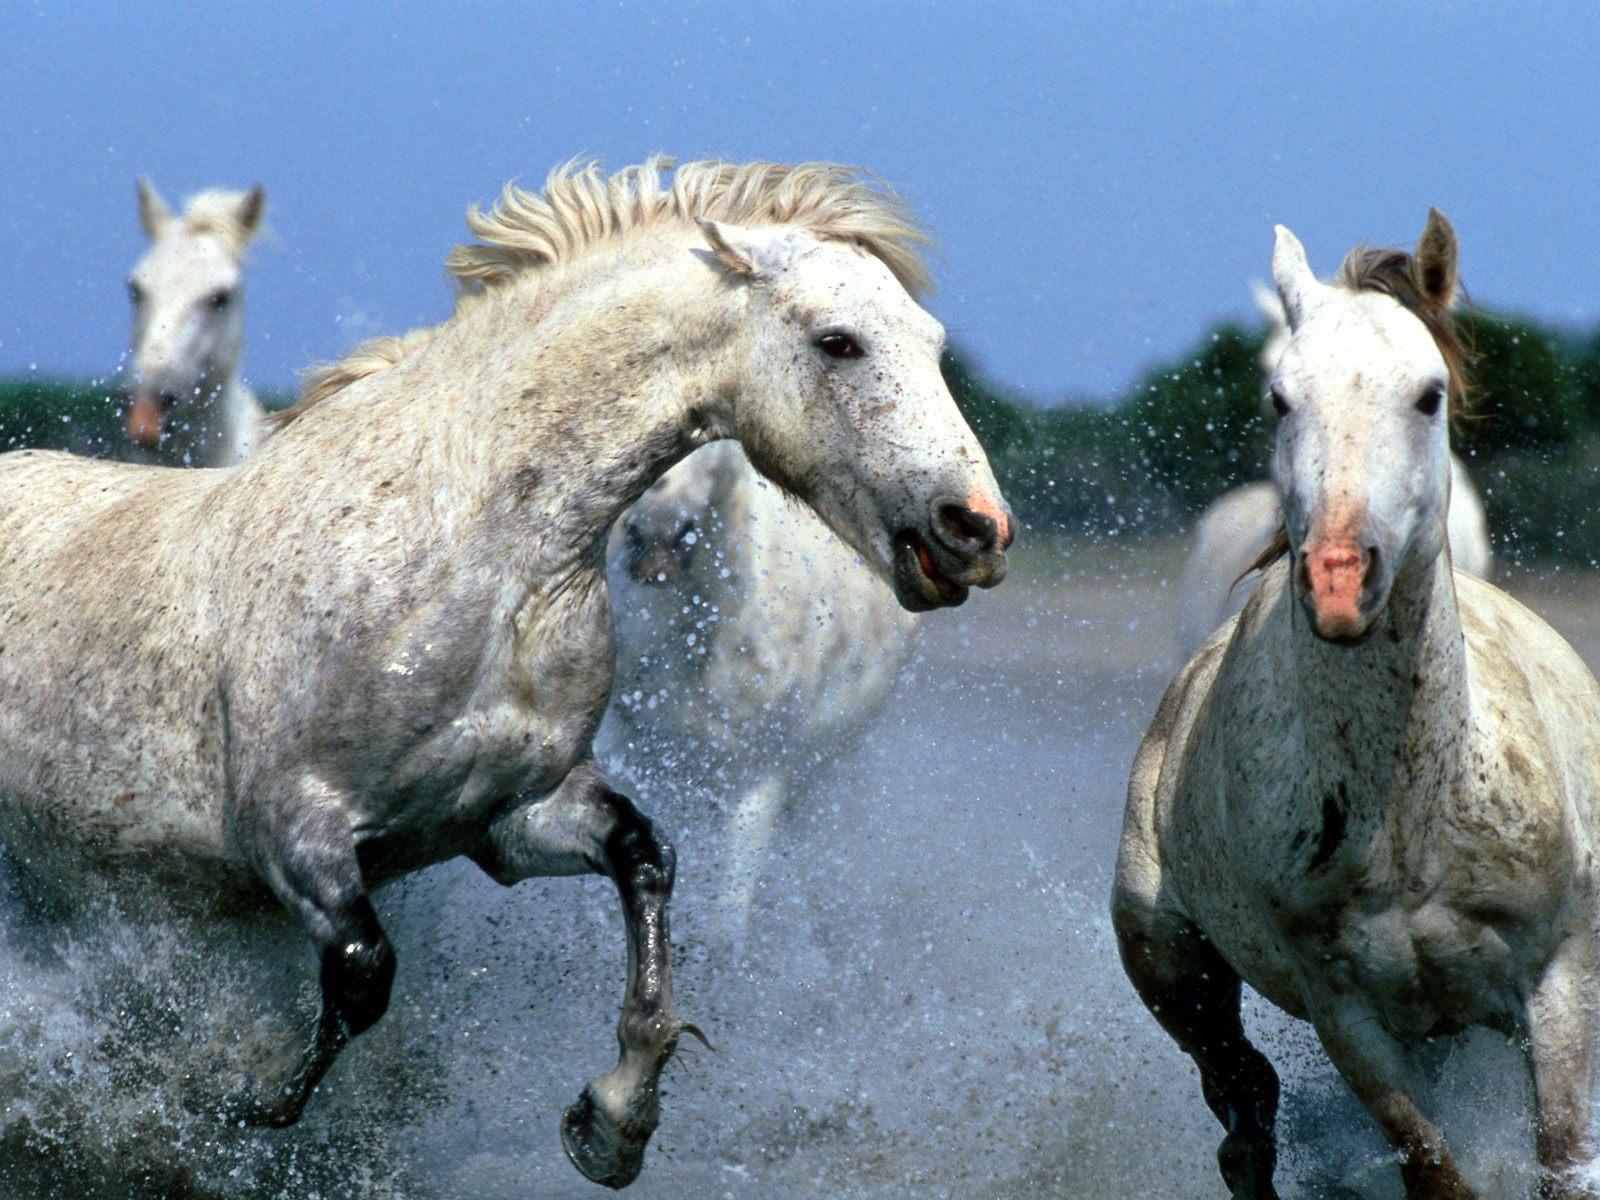 Free Horses Wallpapers for Desktop Backgrounds Wish you enjoy it